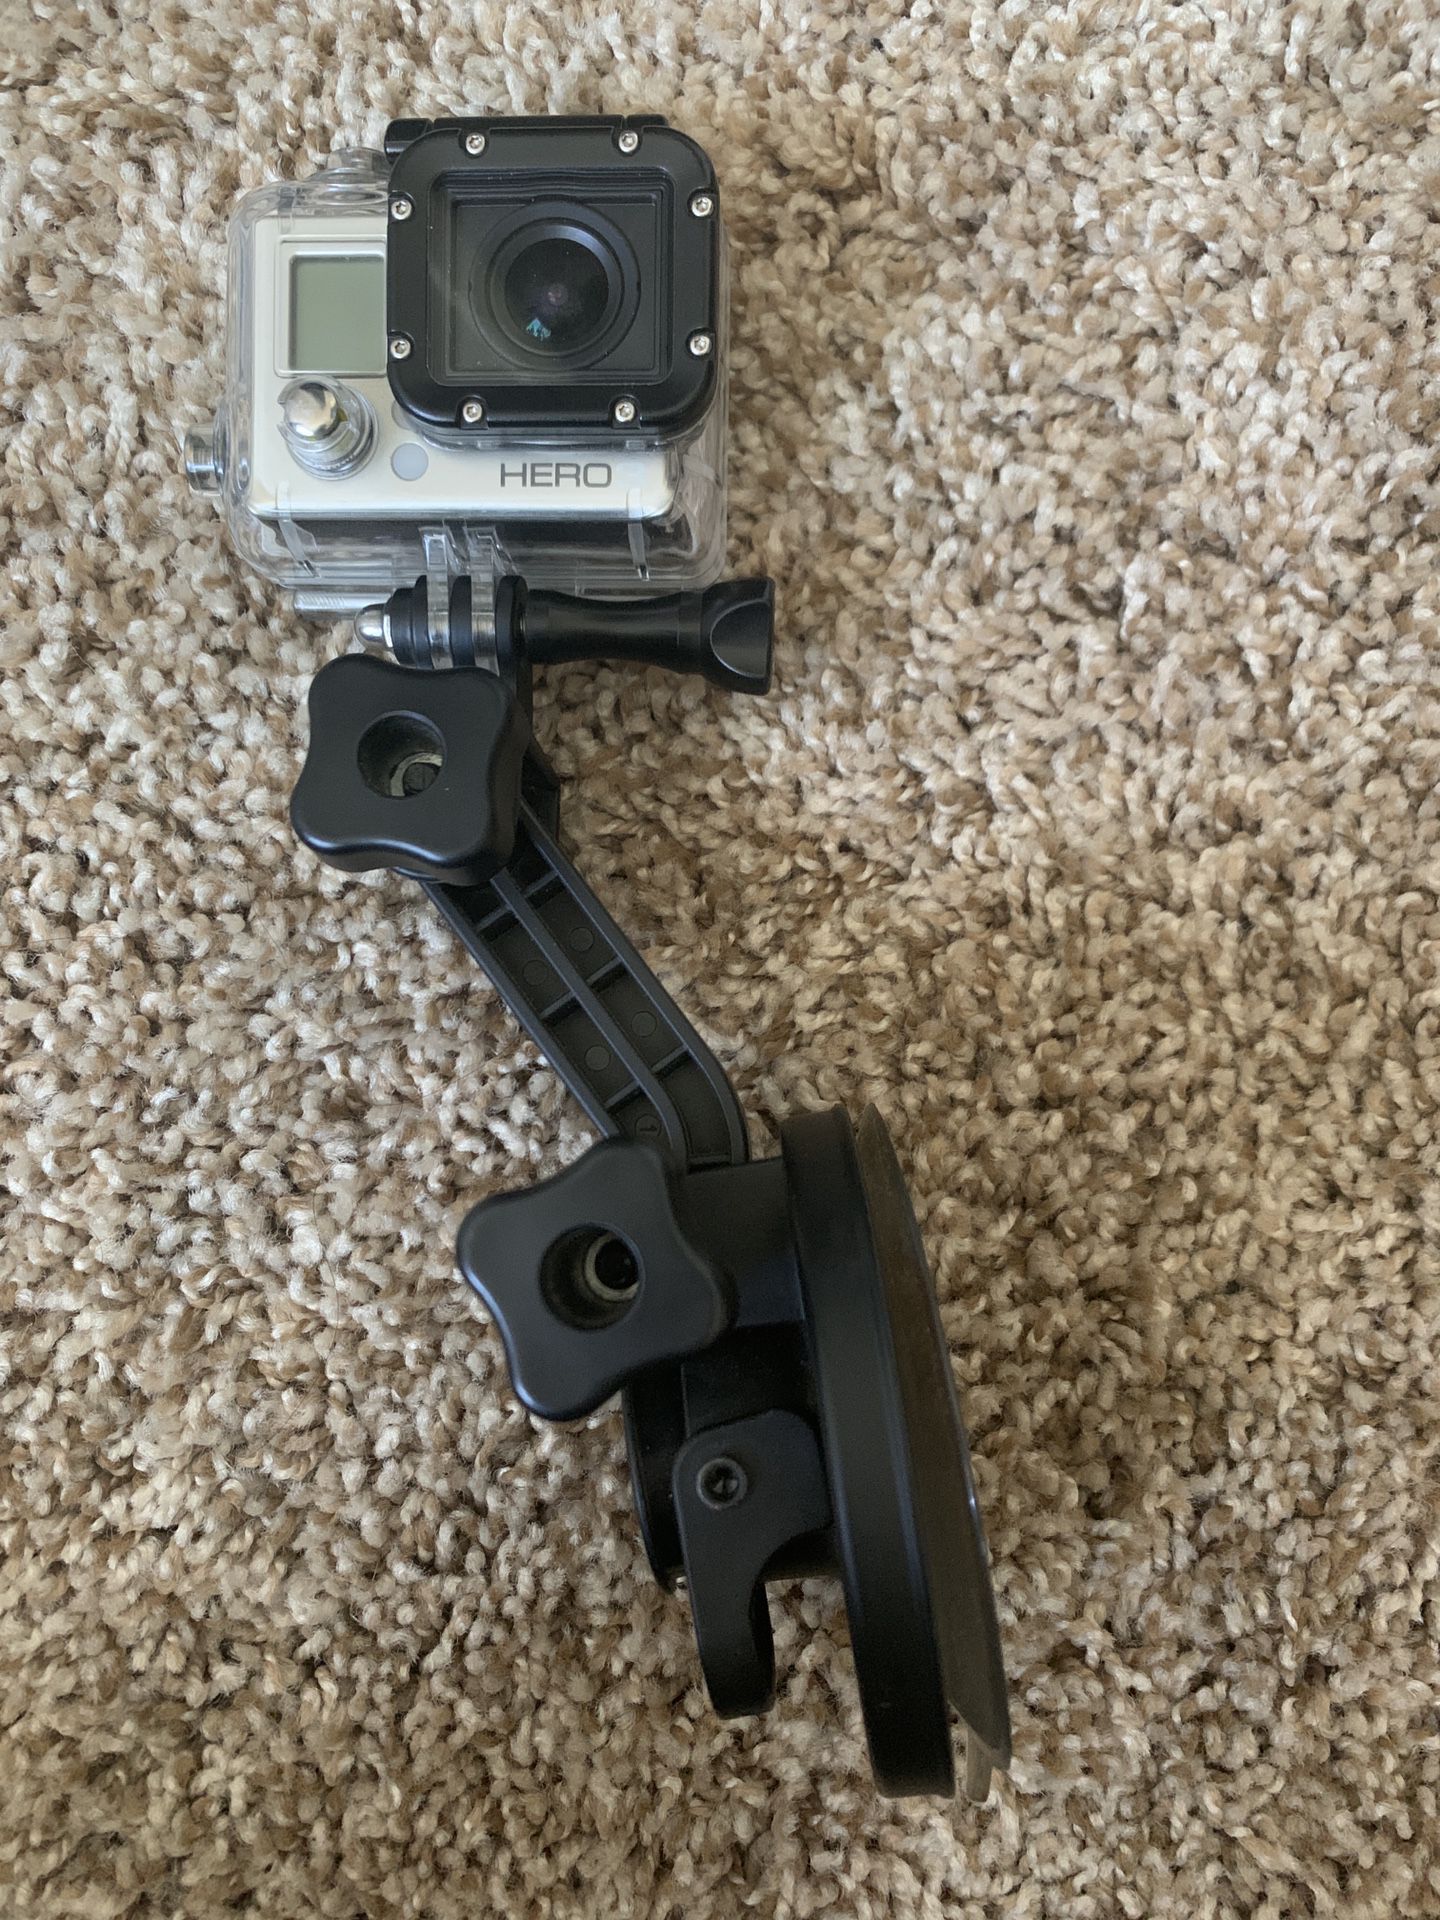 Go pro hero 3 with case and attachment